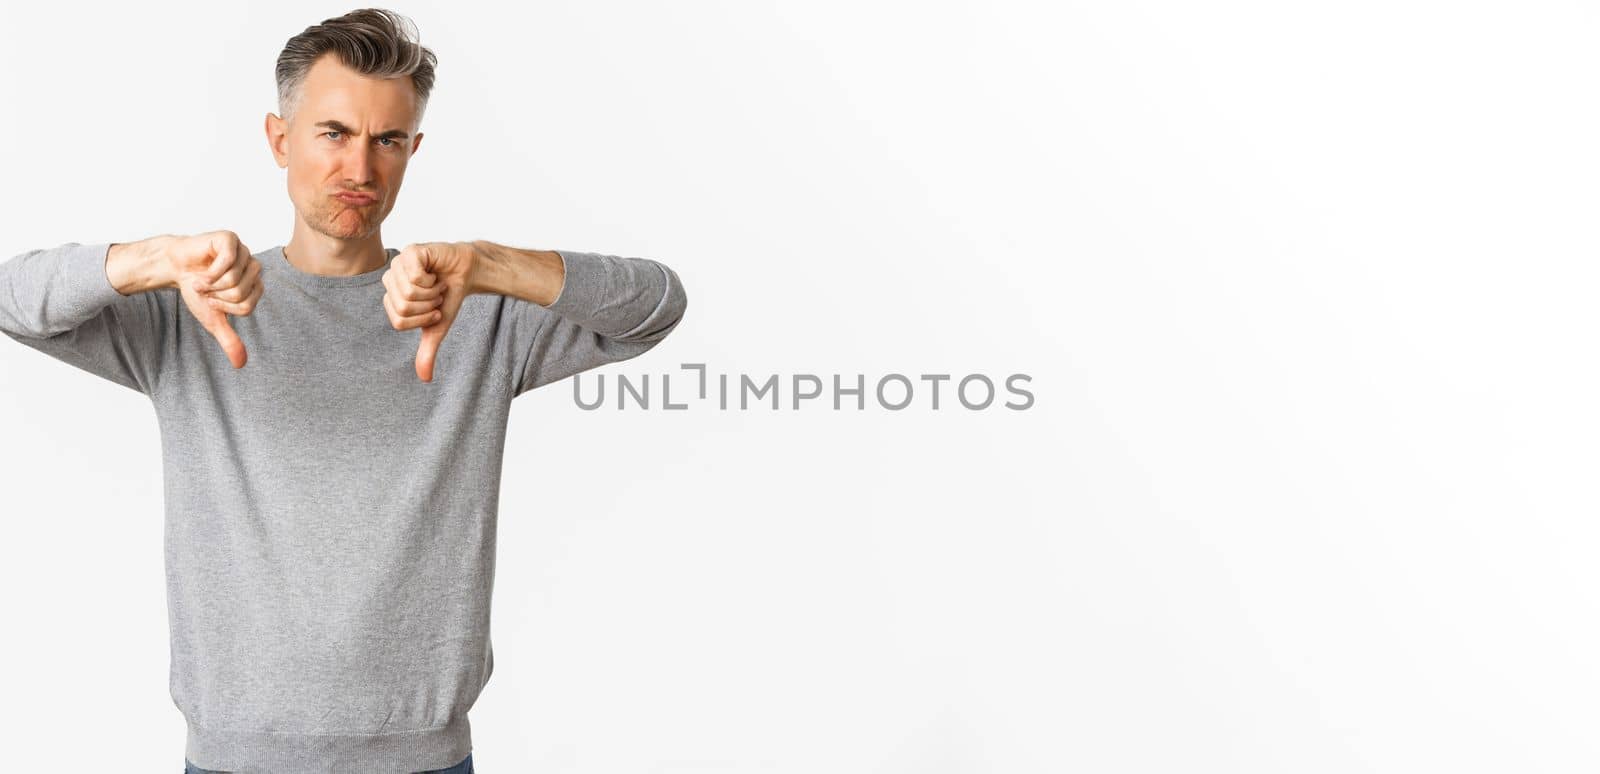 Skeptical and disappointed middle-aged man, grimacing unamused and showing thumbs-down, dislike something bad, standing over white background.